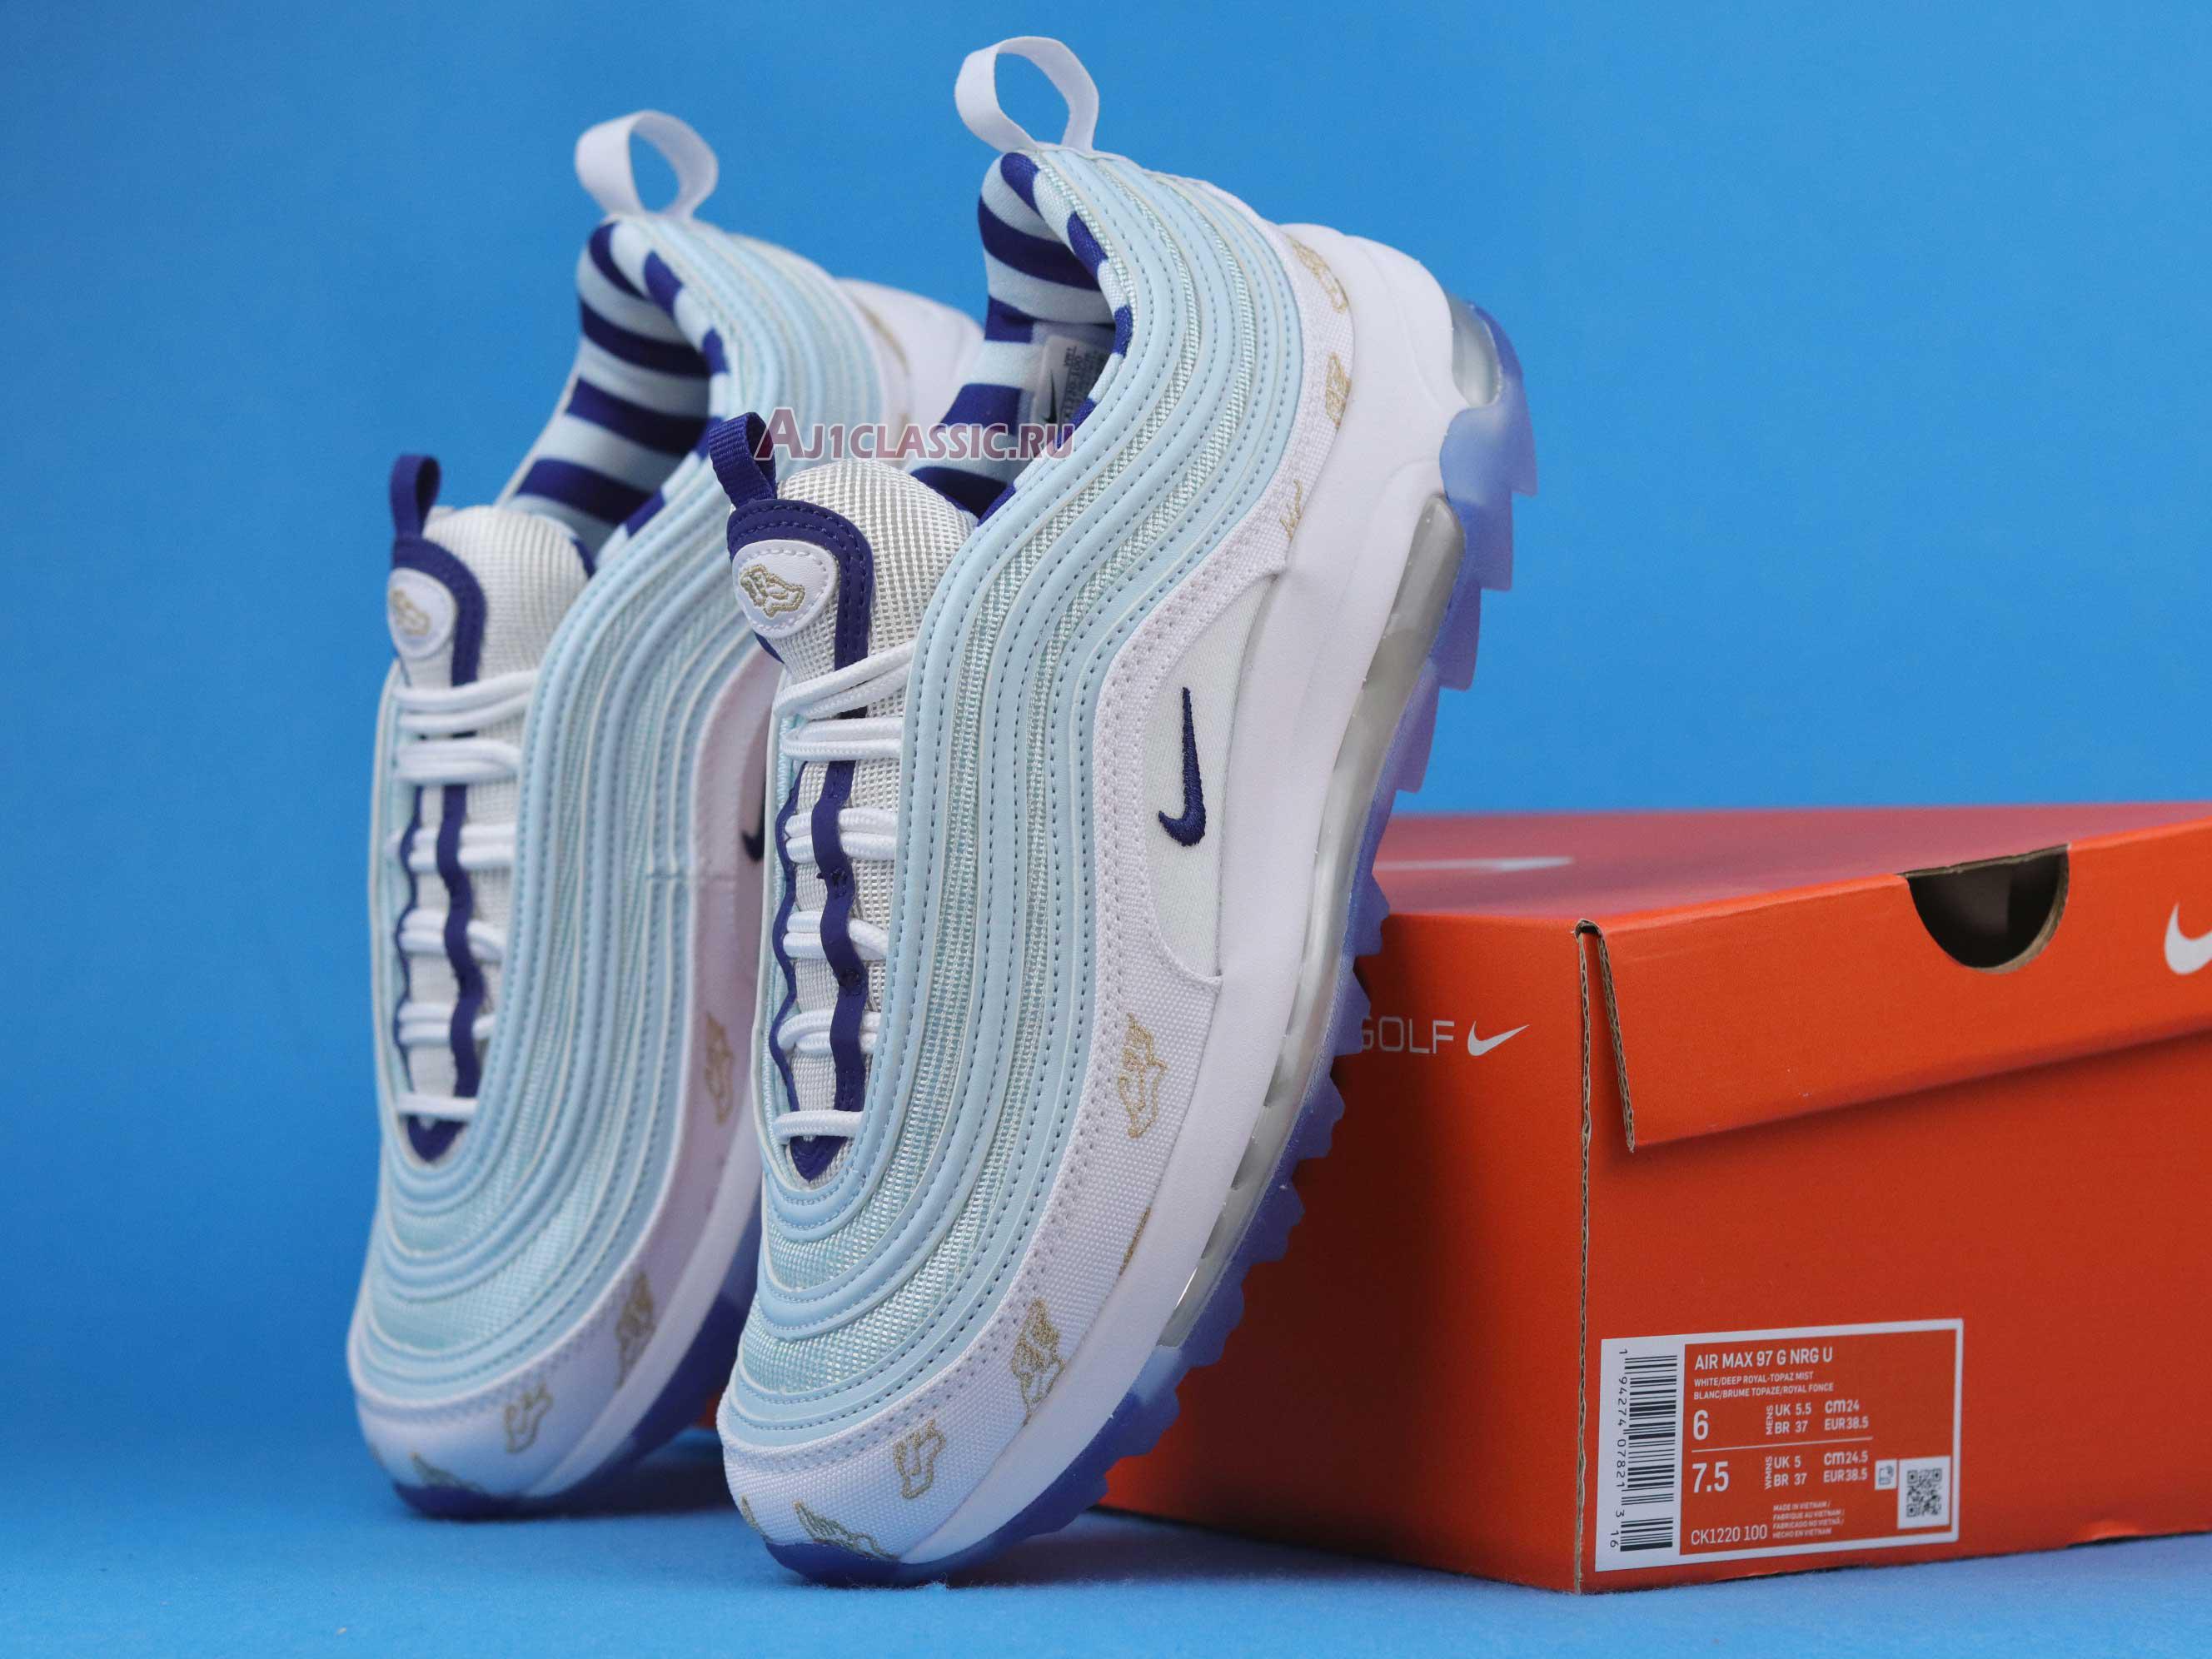 Nike Air Max 97 Golf NRG Wing It CK1220-100 White/Topaz Mist/Celestial Gold/Deep Royal Sneakers